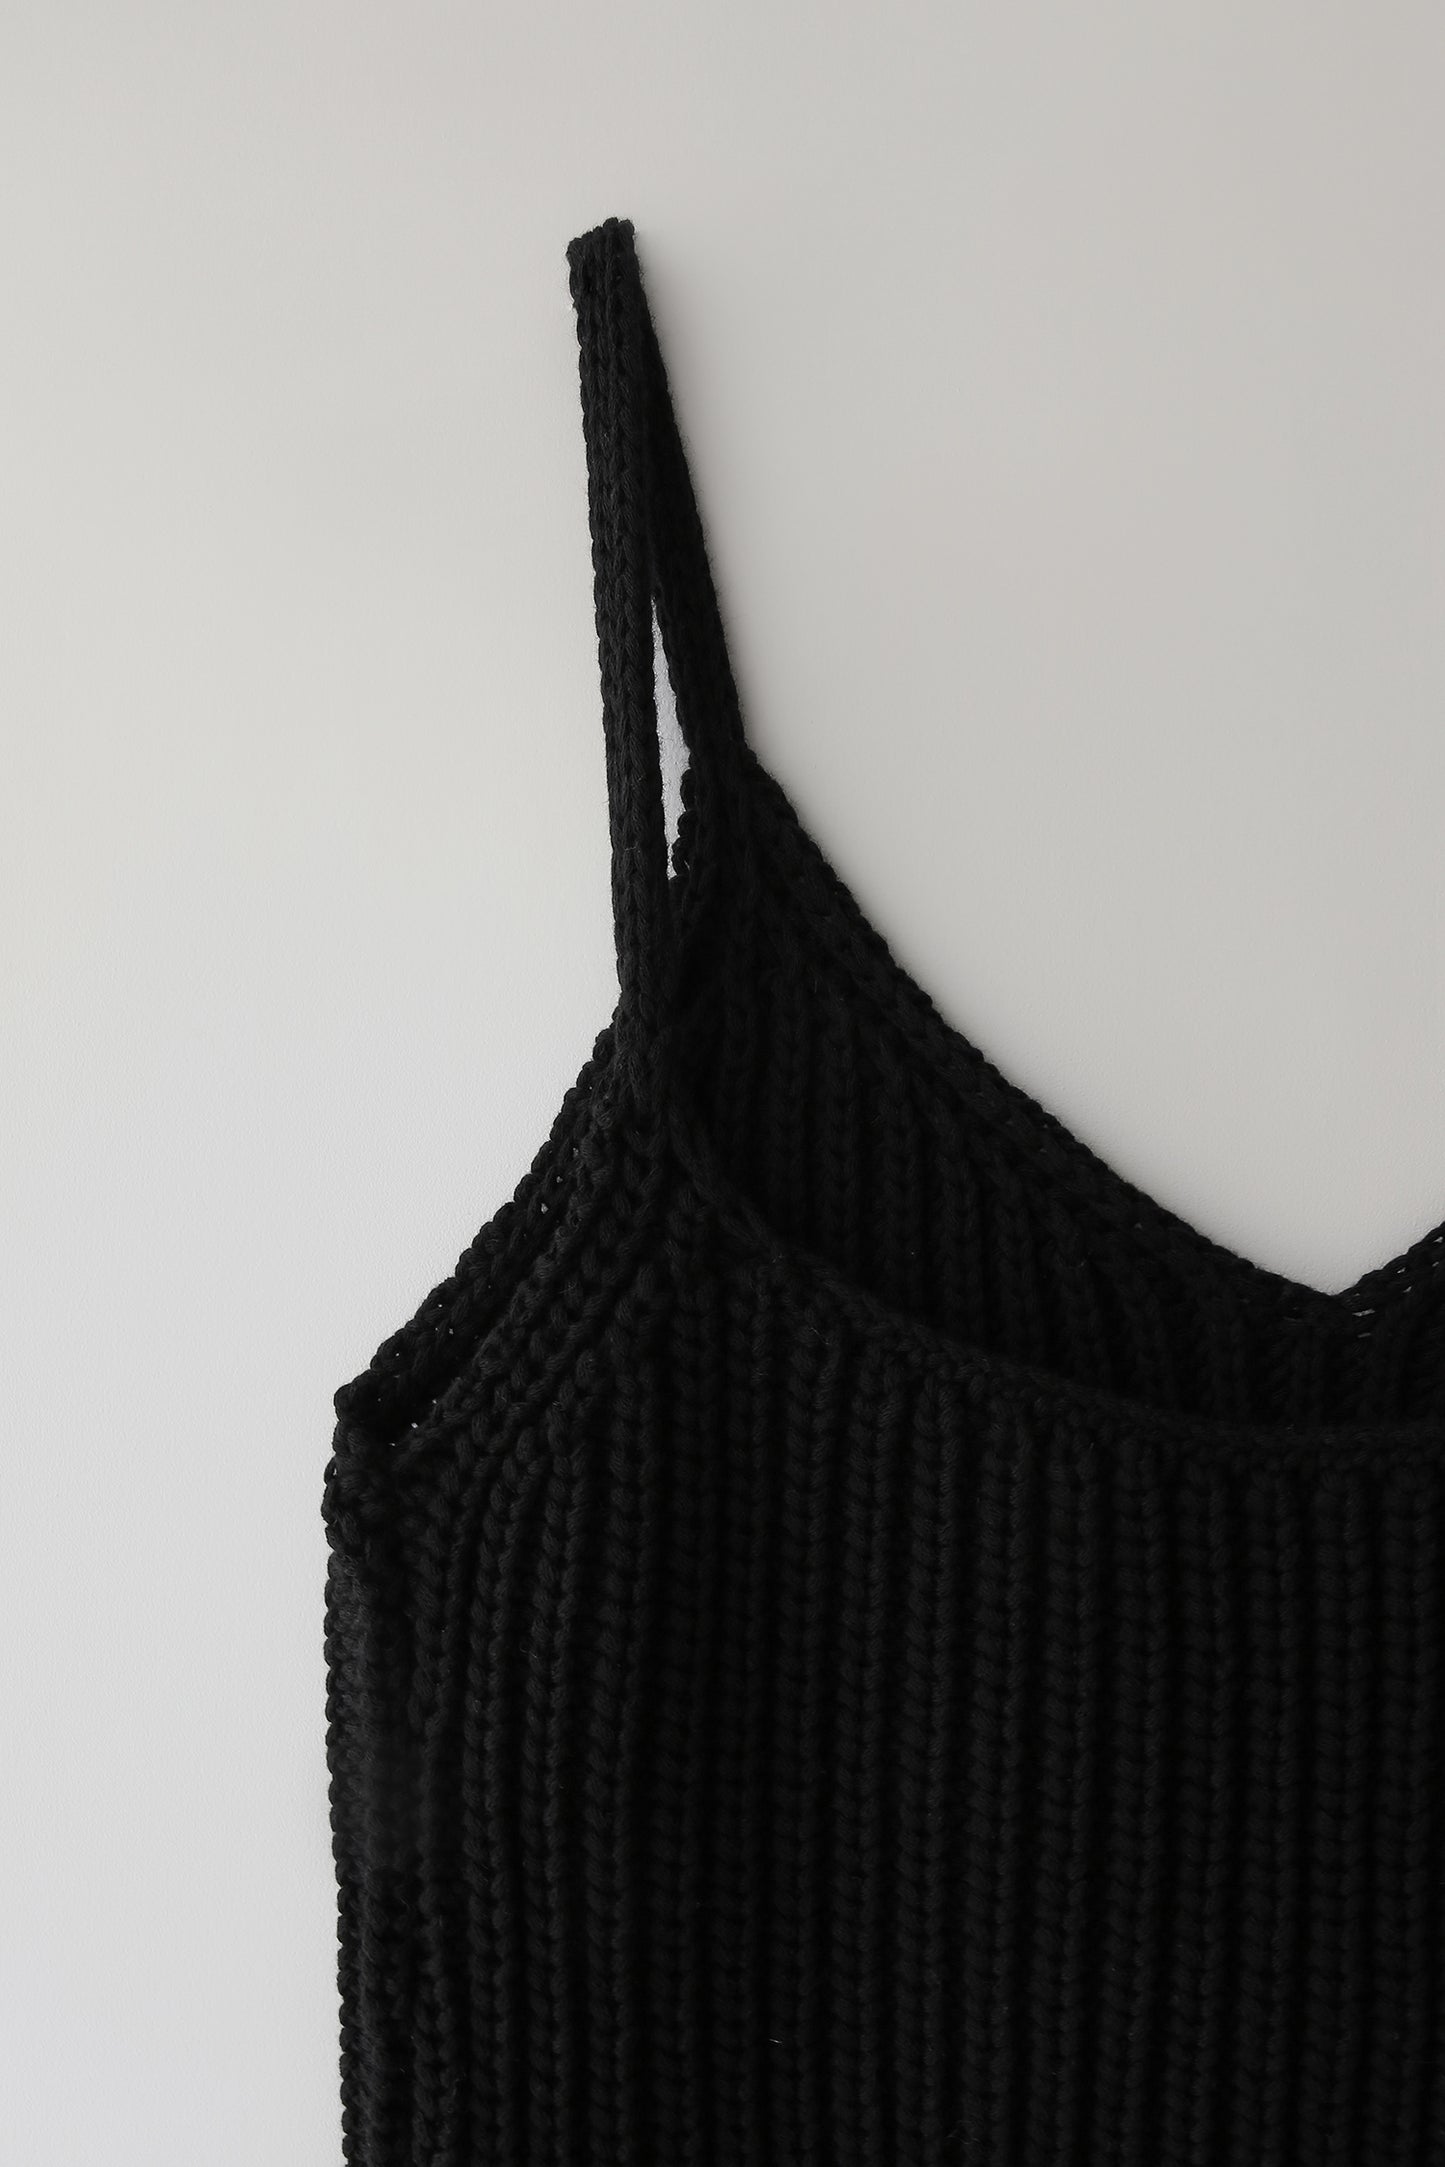 NOTHING WRITTEN - Jerry Knit Cami Top (Black)